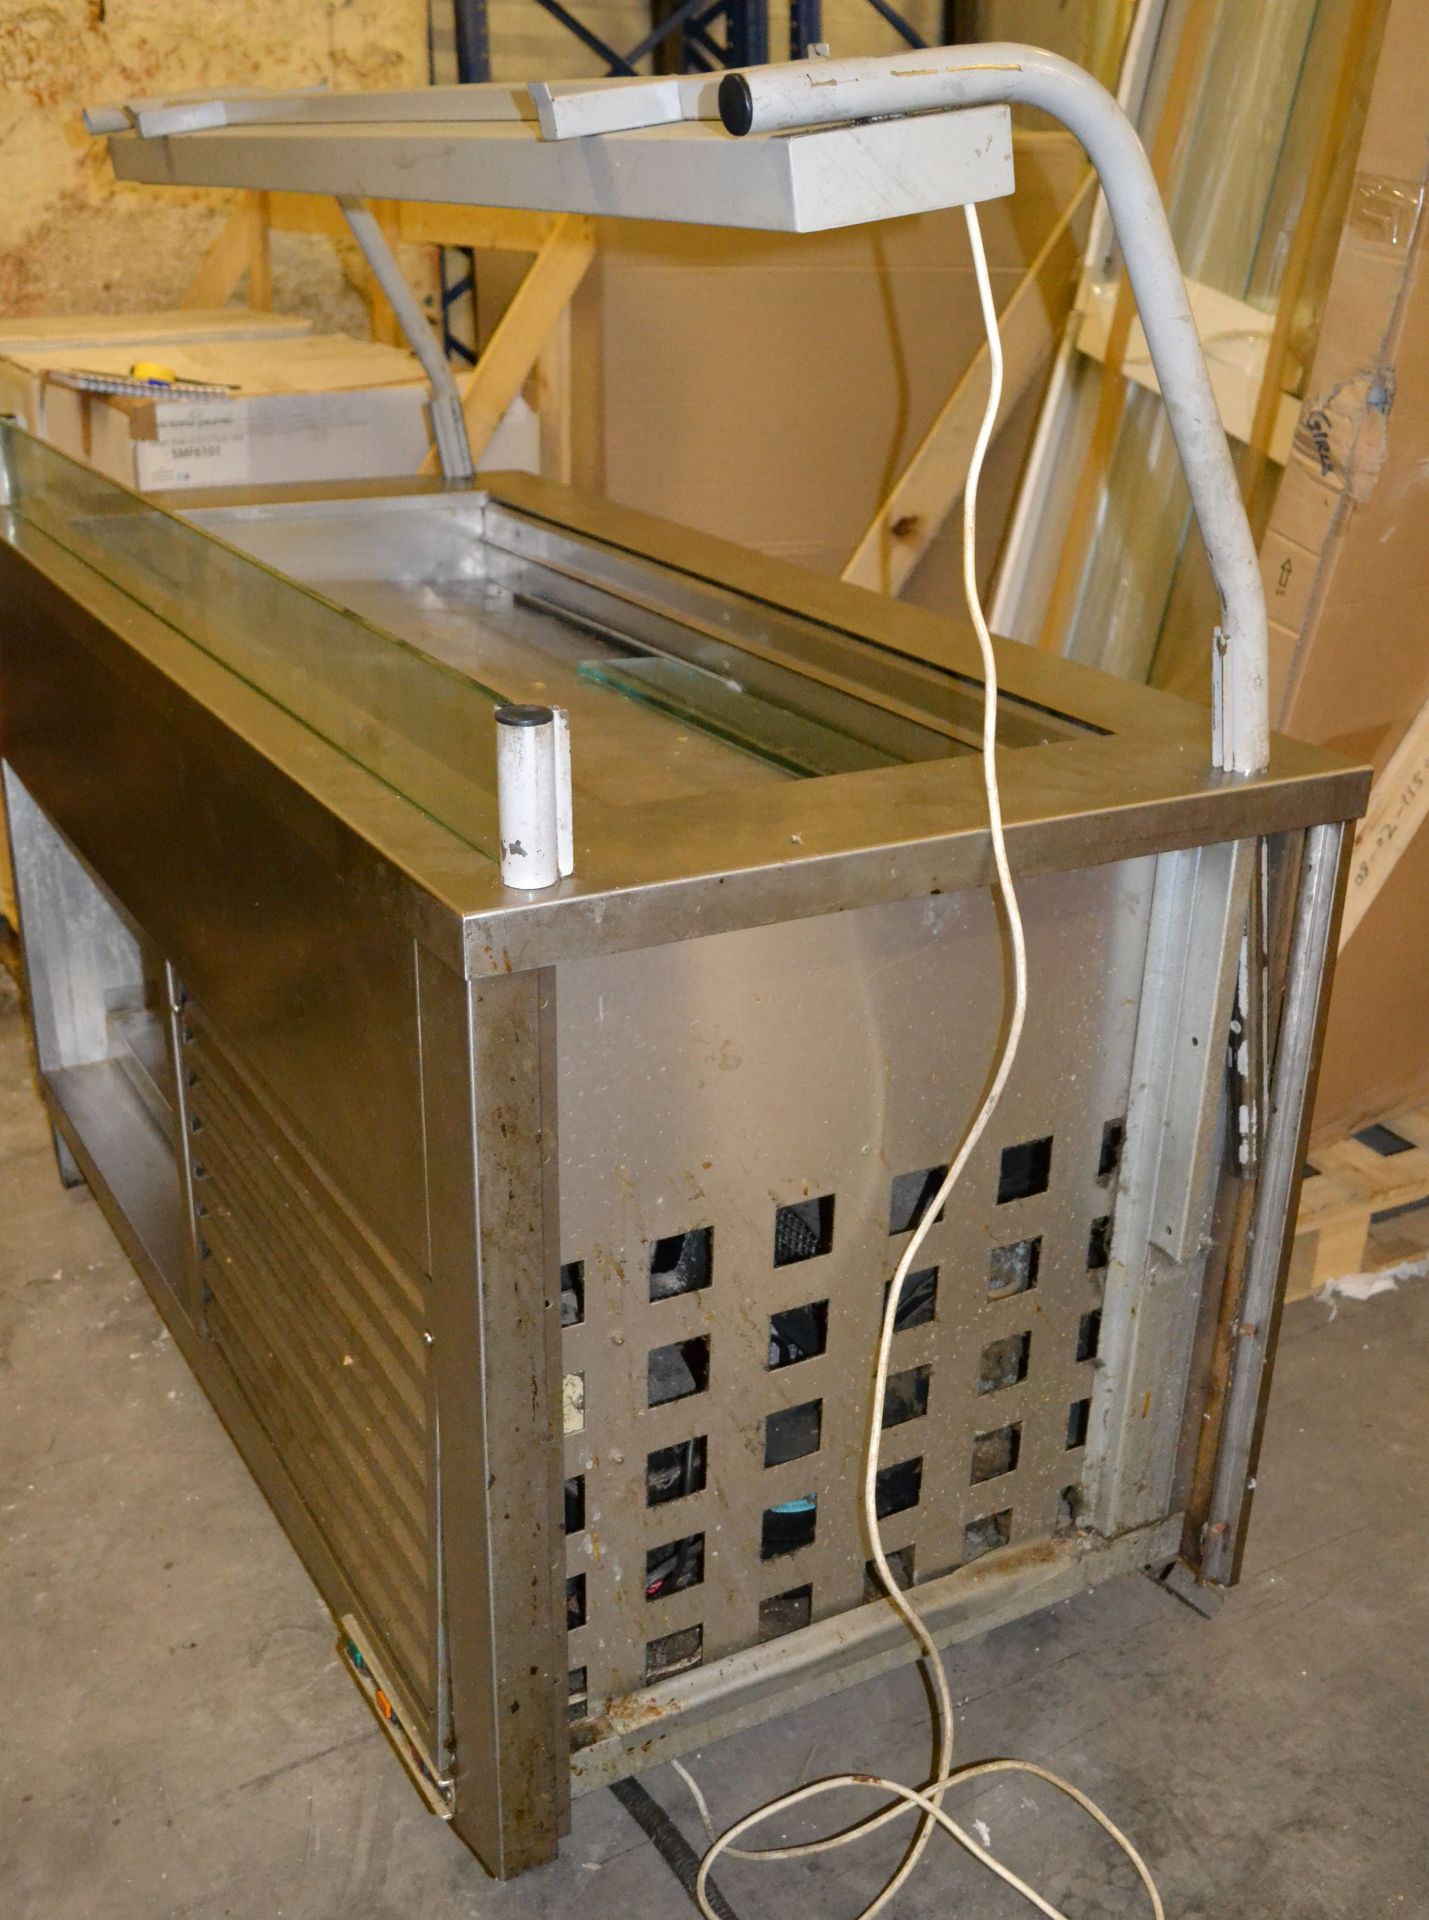 1 x Advanced Catering Equipment 1500BADW 240V Chilled Counter - Details to follow - Ref: FJC011 - - Image 7 of 10